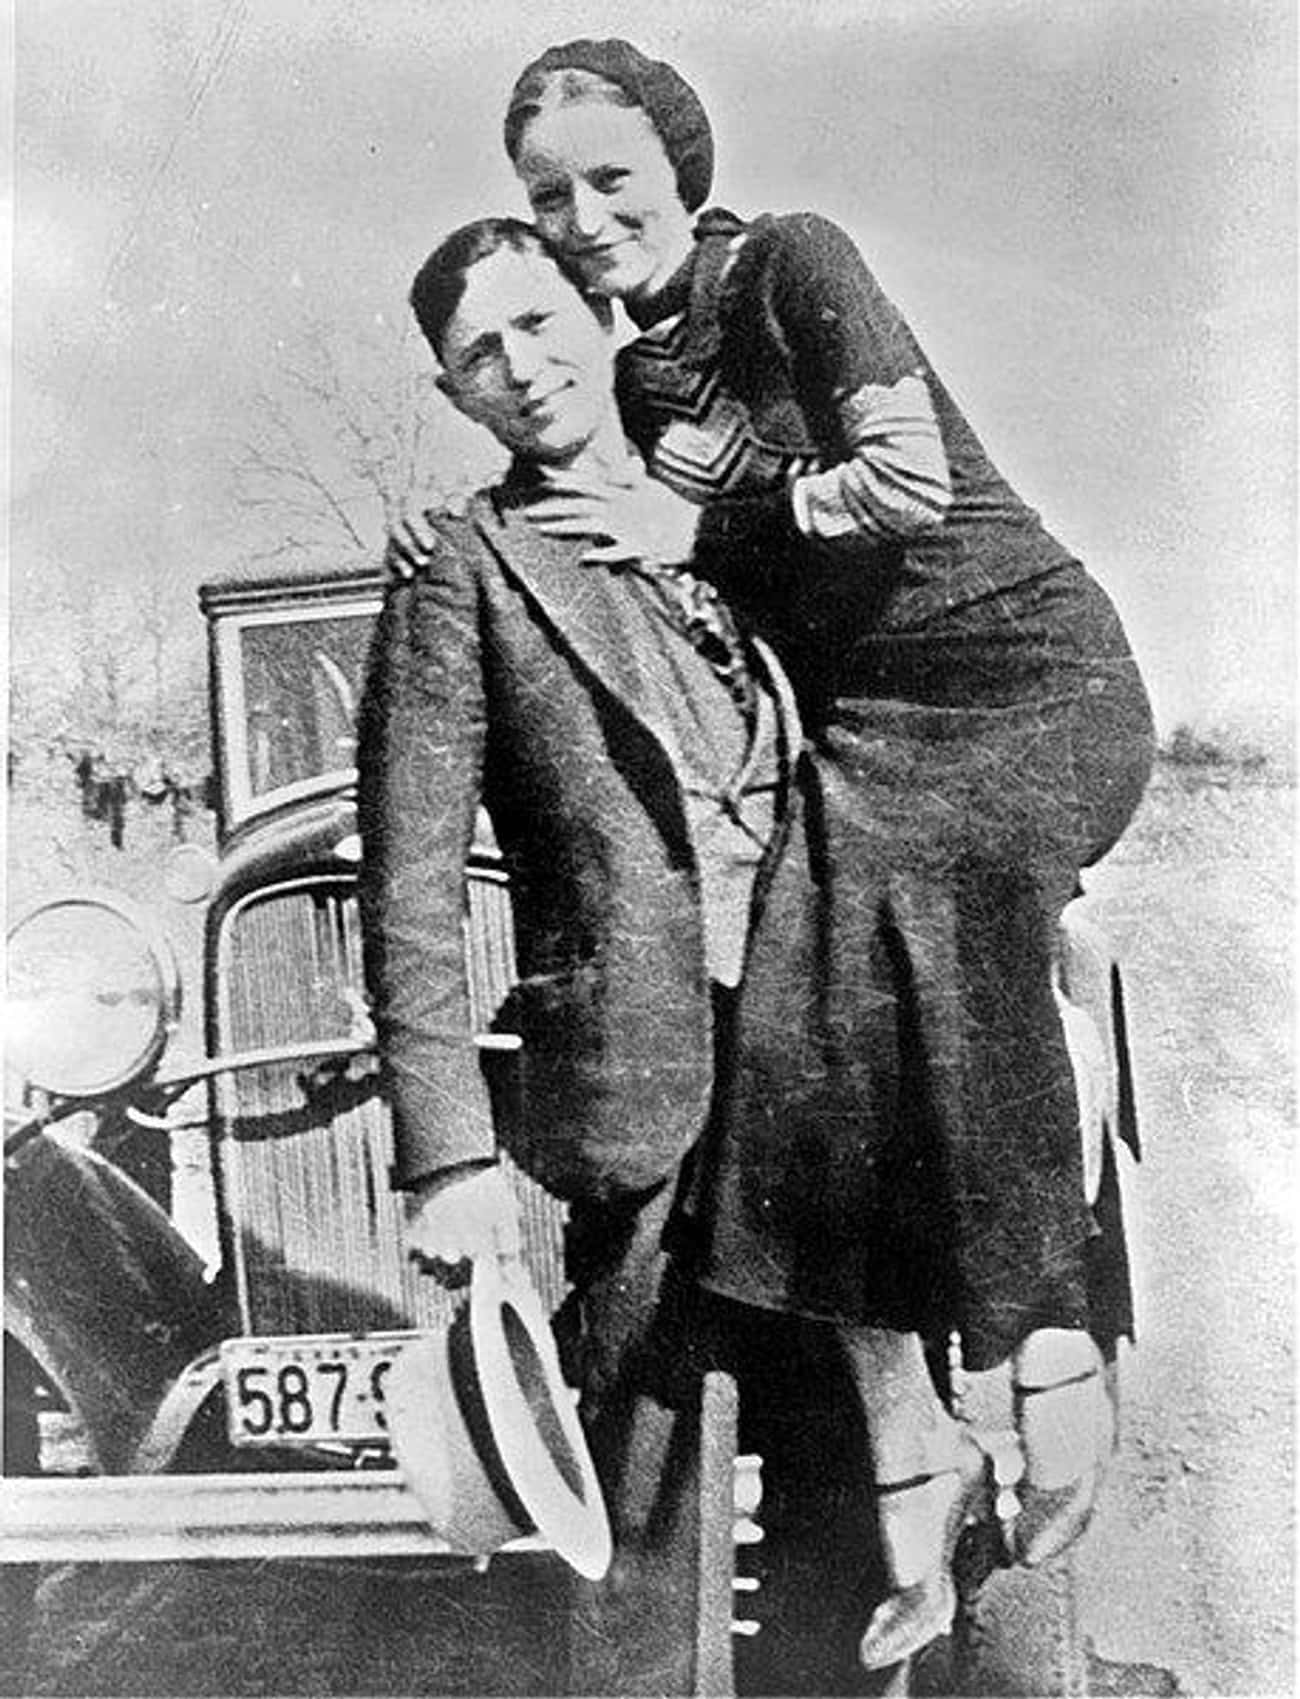 Bonnie And Clyde Could Get Pretty Friendly With Their Captives